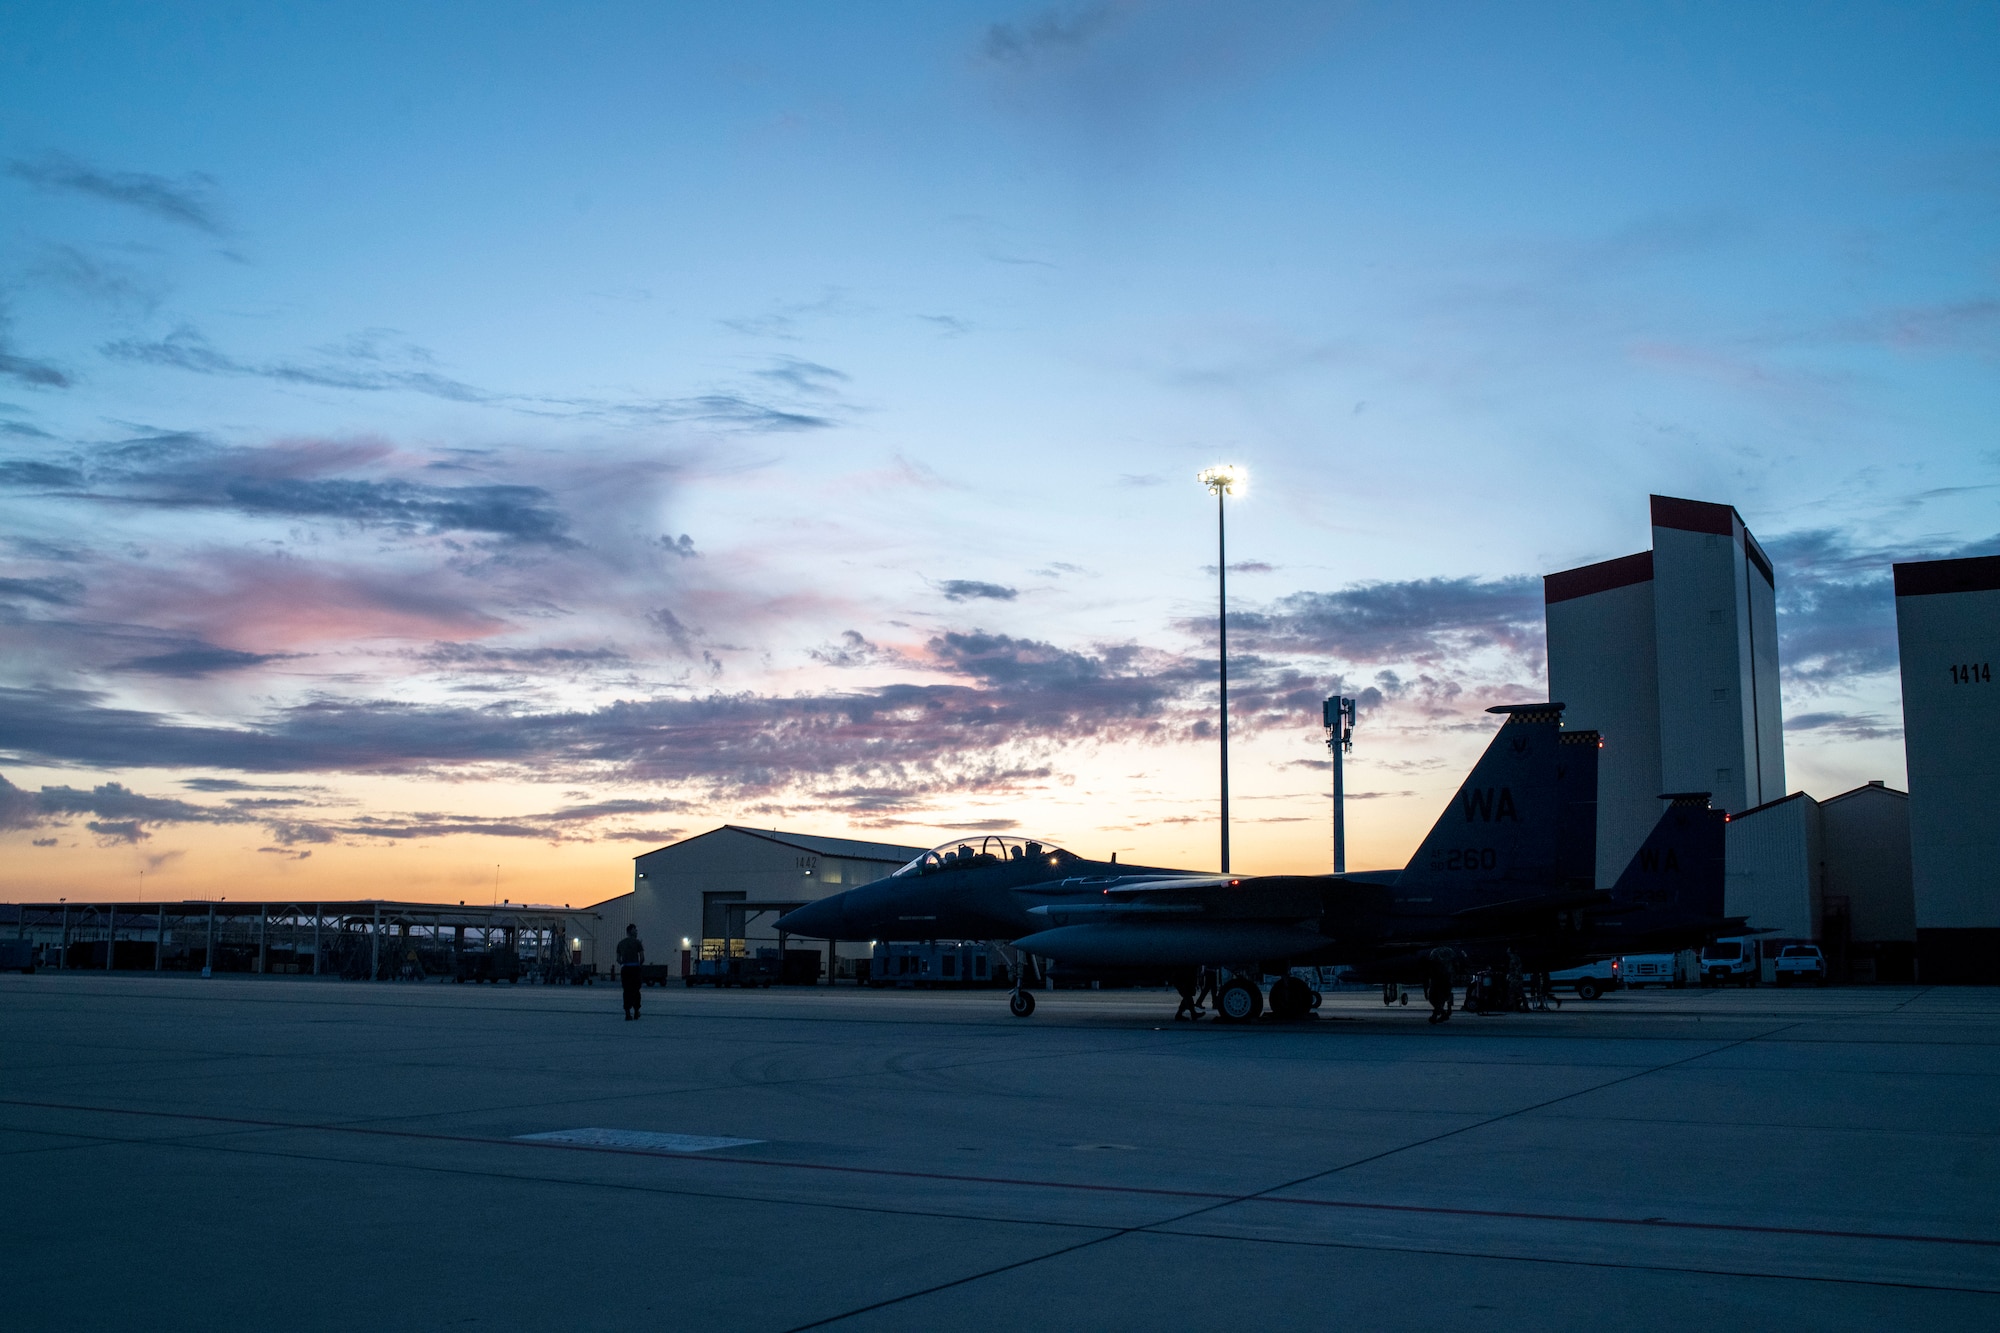 A F-15 assigned to the U.S. Air Force Weapons School park on the historic flightline at Edwards Air Force Base, California. The USAF Weapons School teaches graduate-level instructor courses that provide the world's most advanced training in weapons and tactics employment.